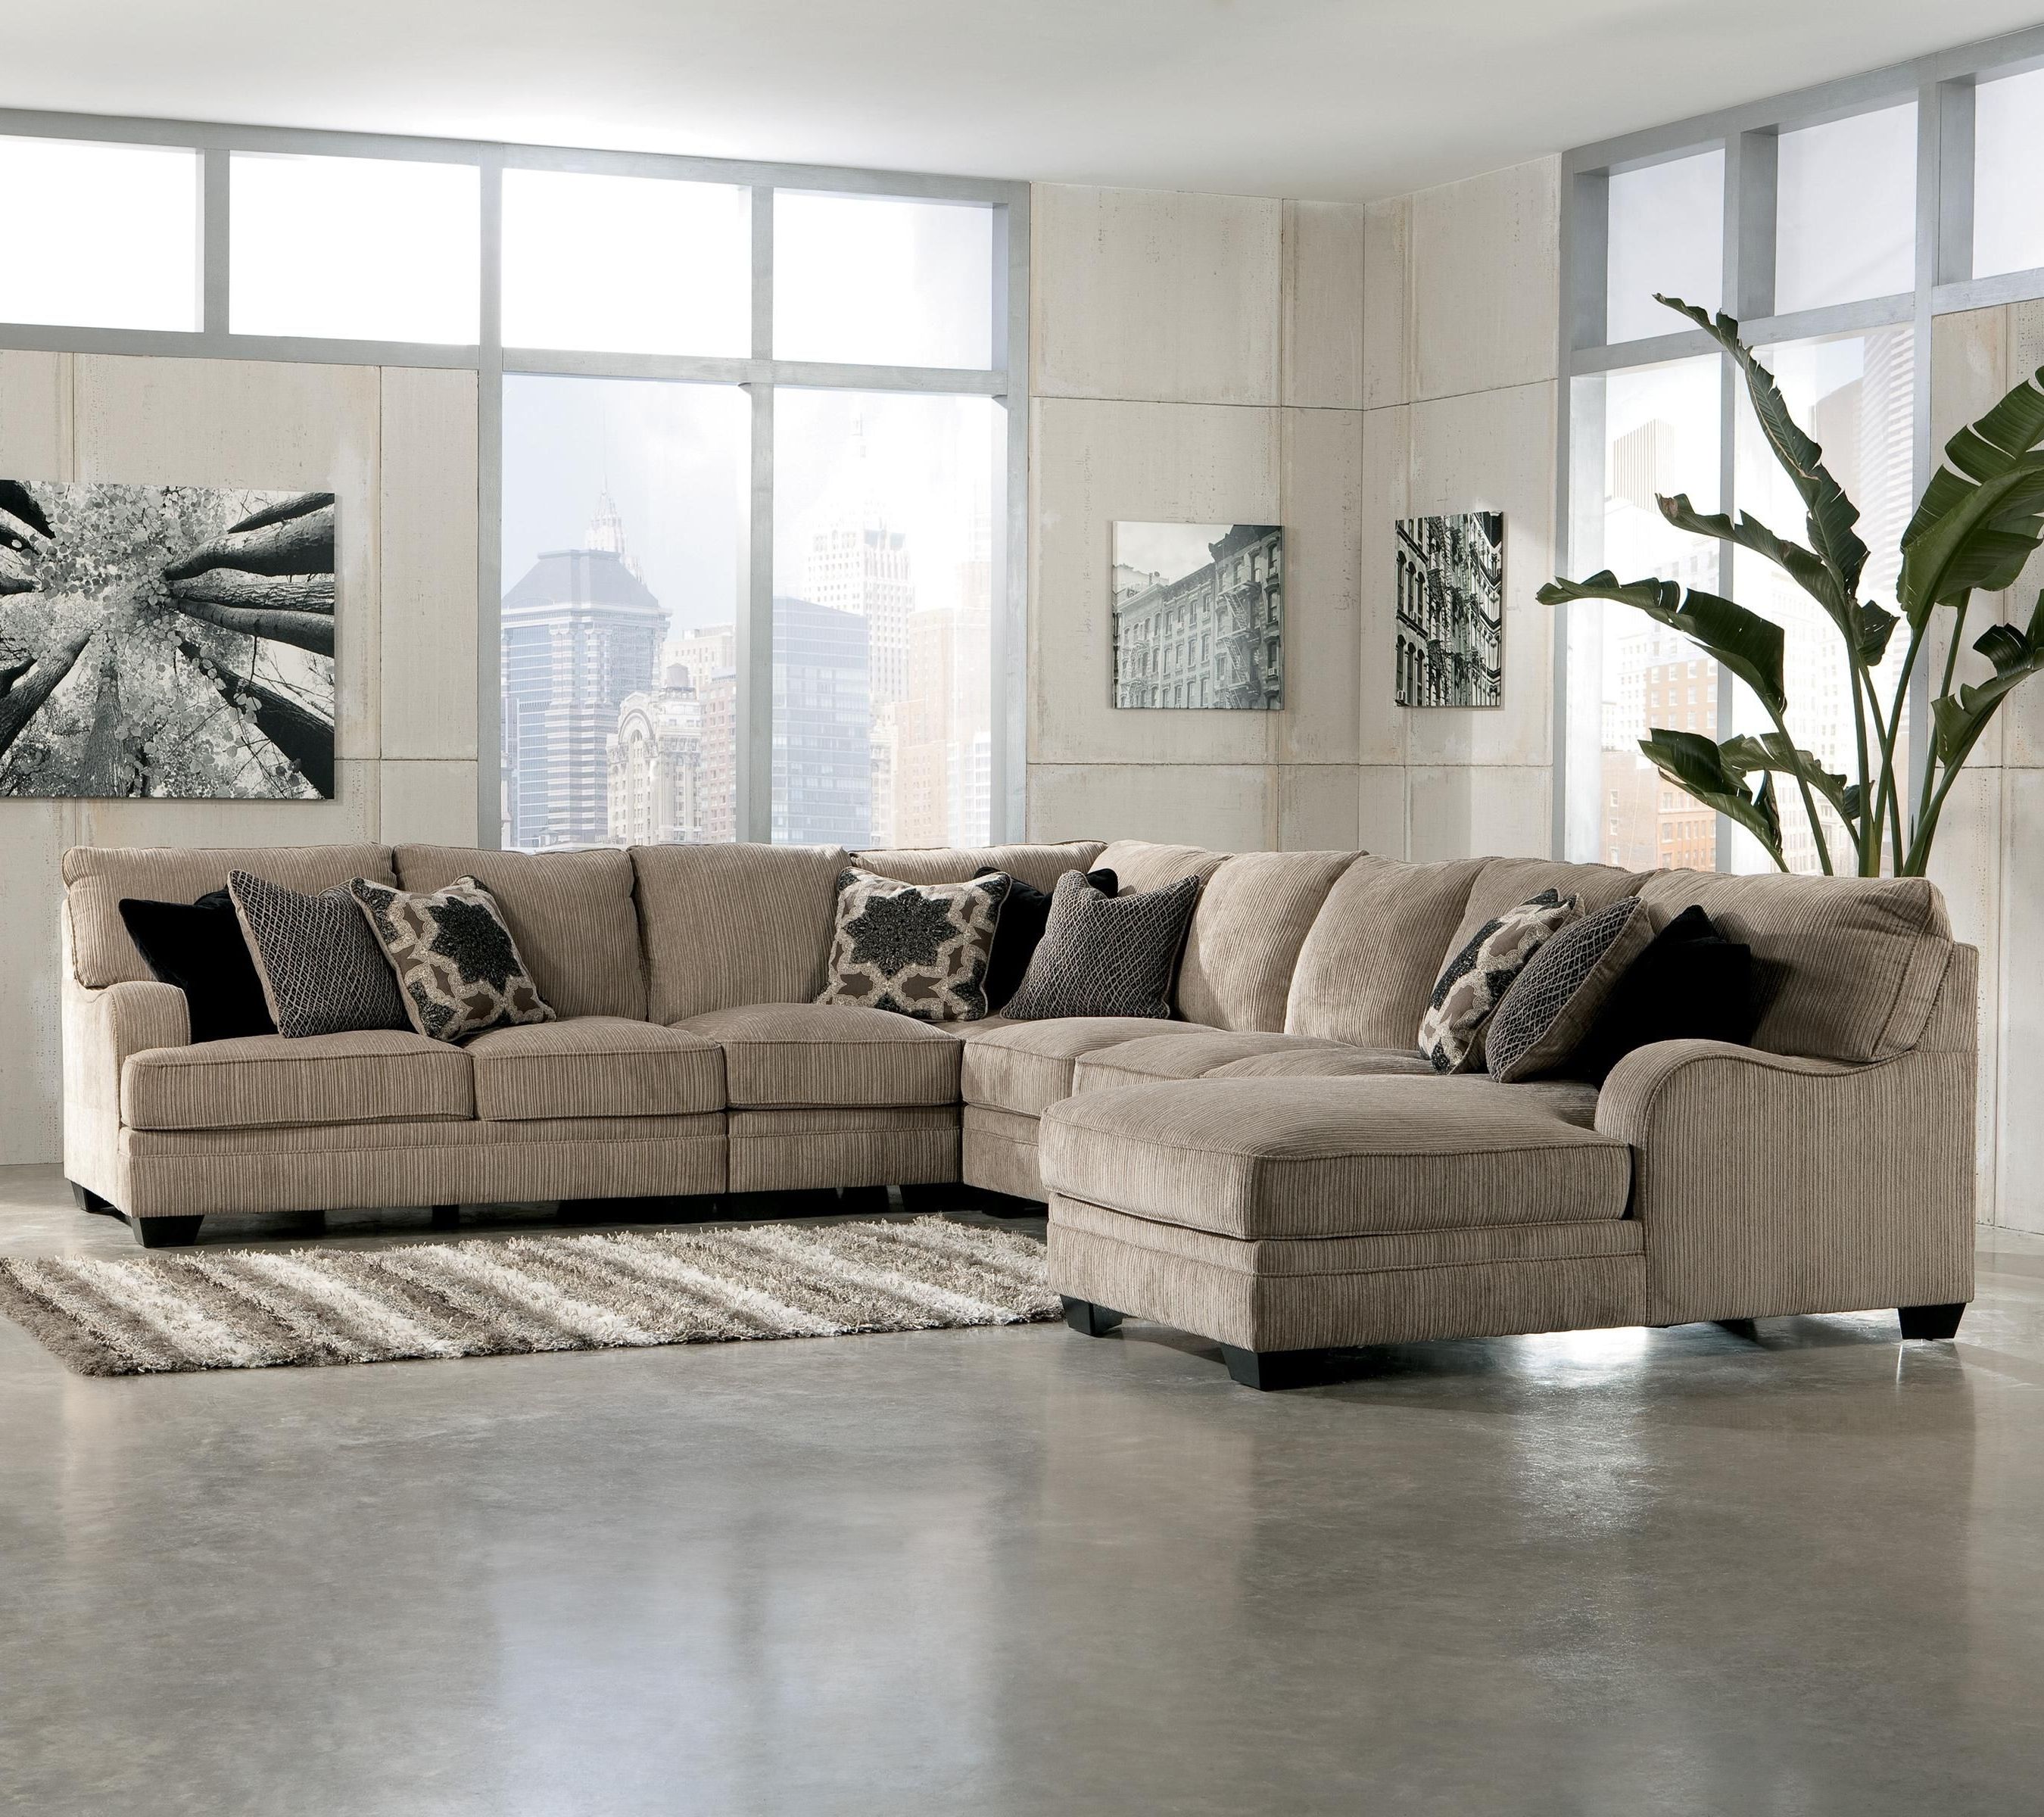 Featured Photo of Top 15 of Jackson Ms Sectional Sofas